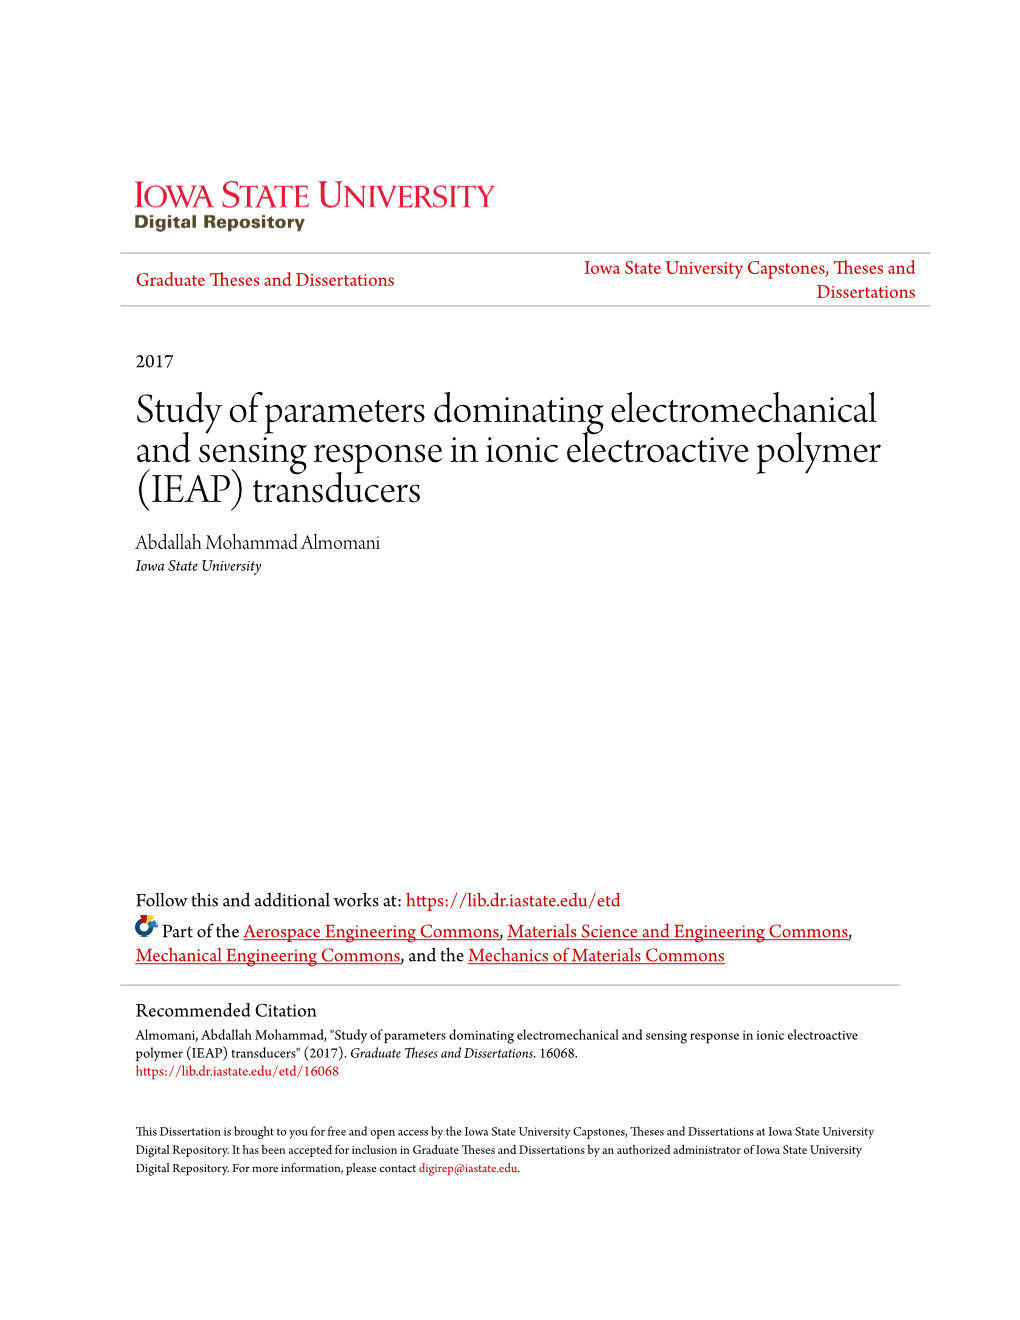 Study of Parameters Dominating Electromechanical and Sensing